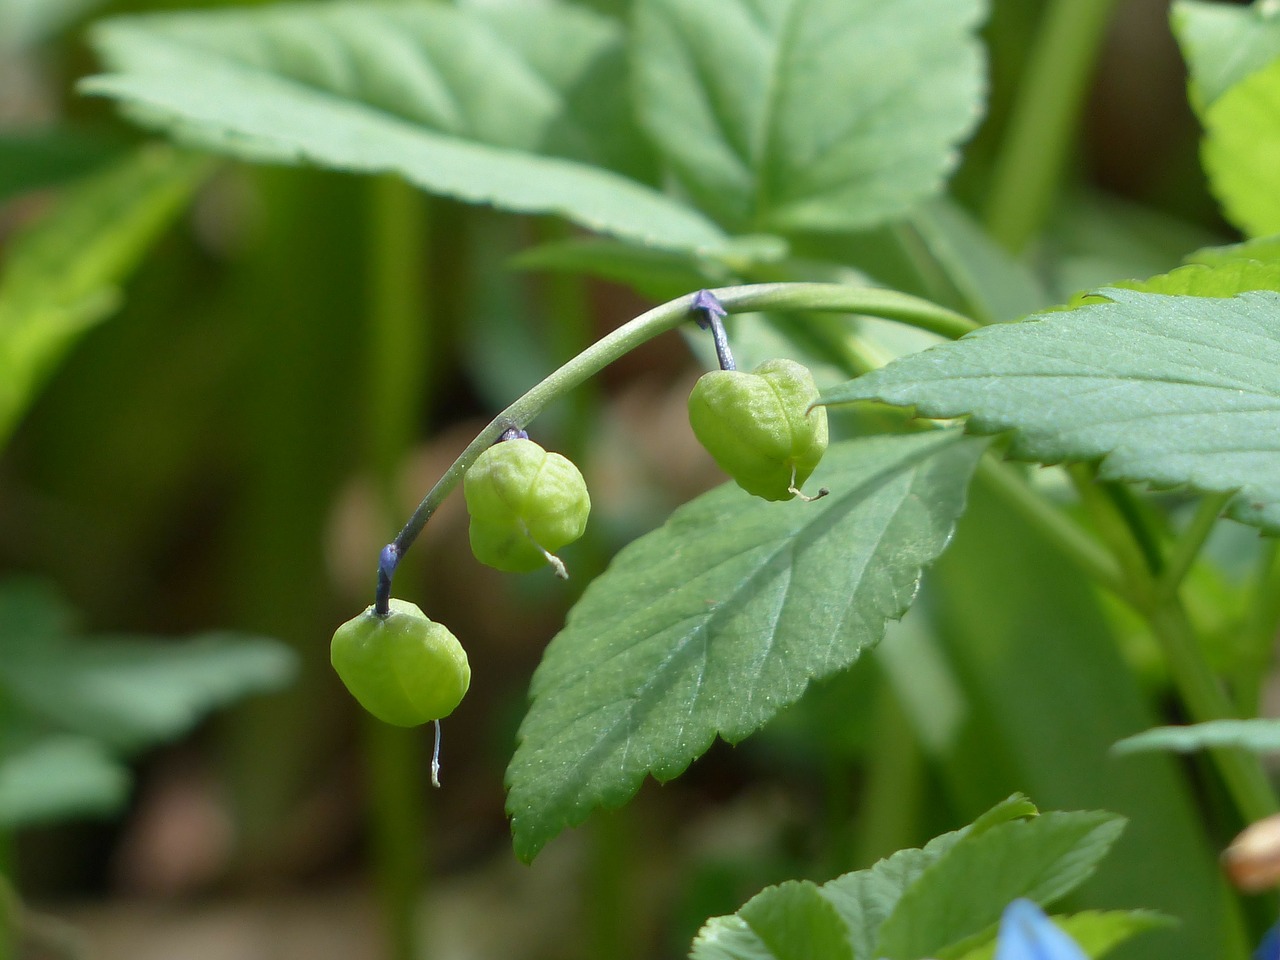 bluebell fruits capsules free photo